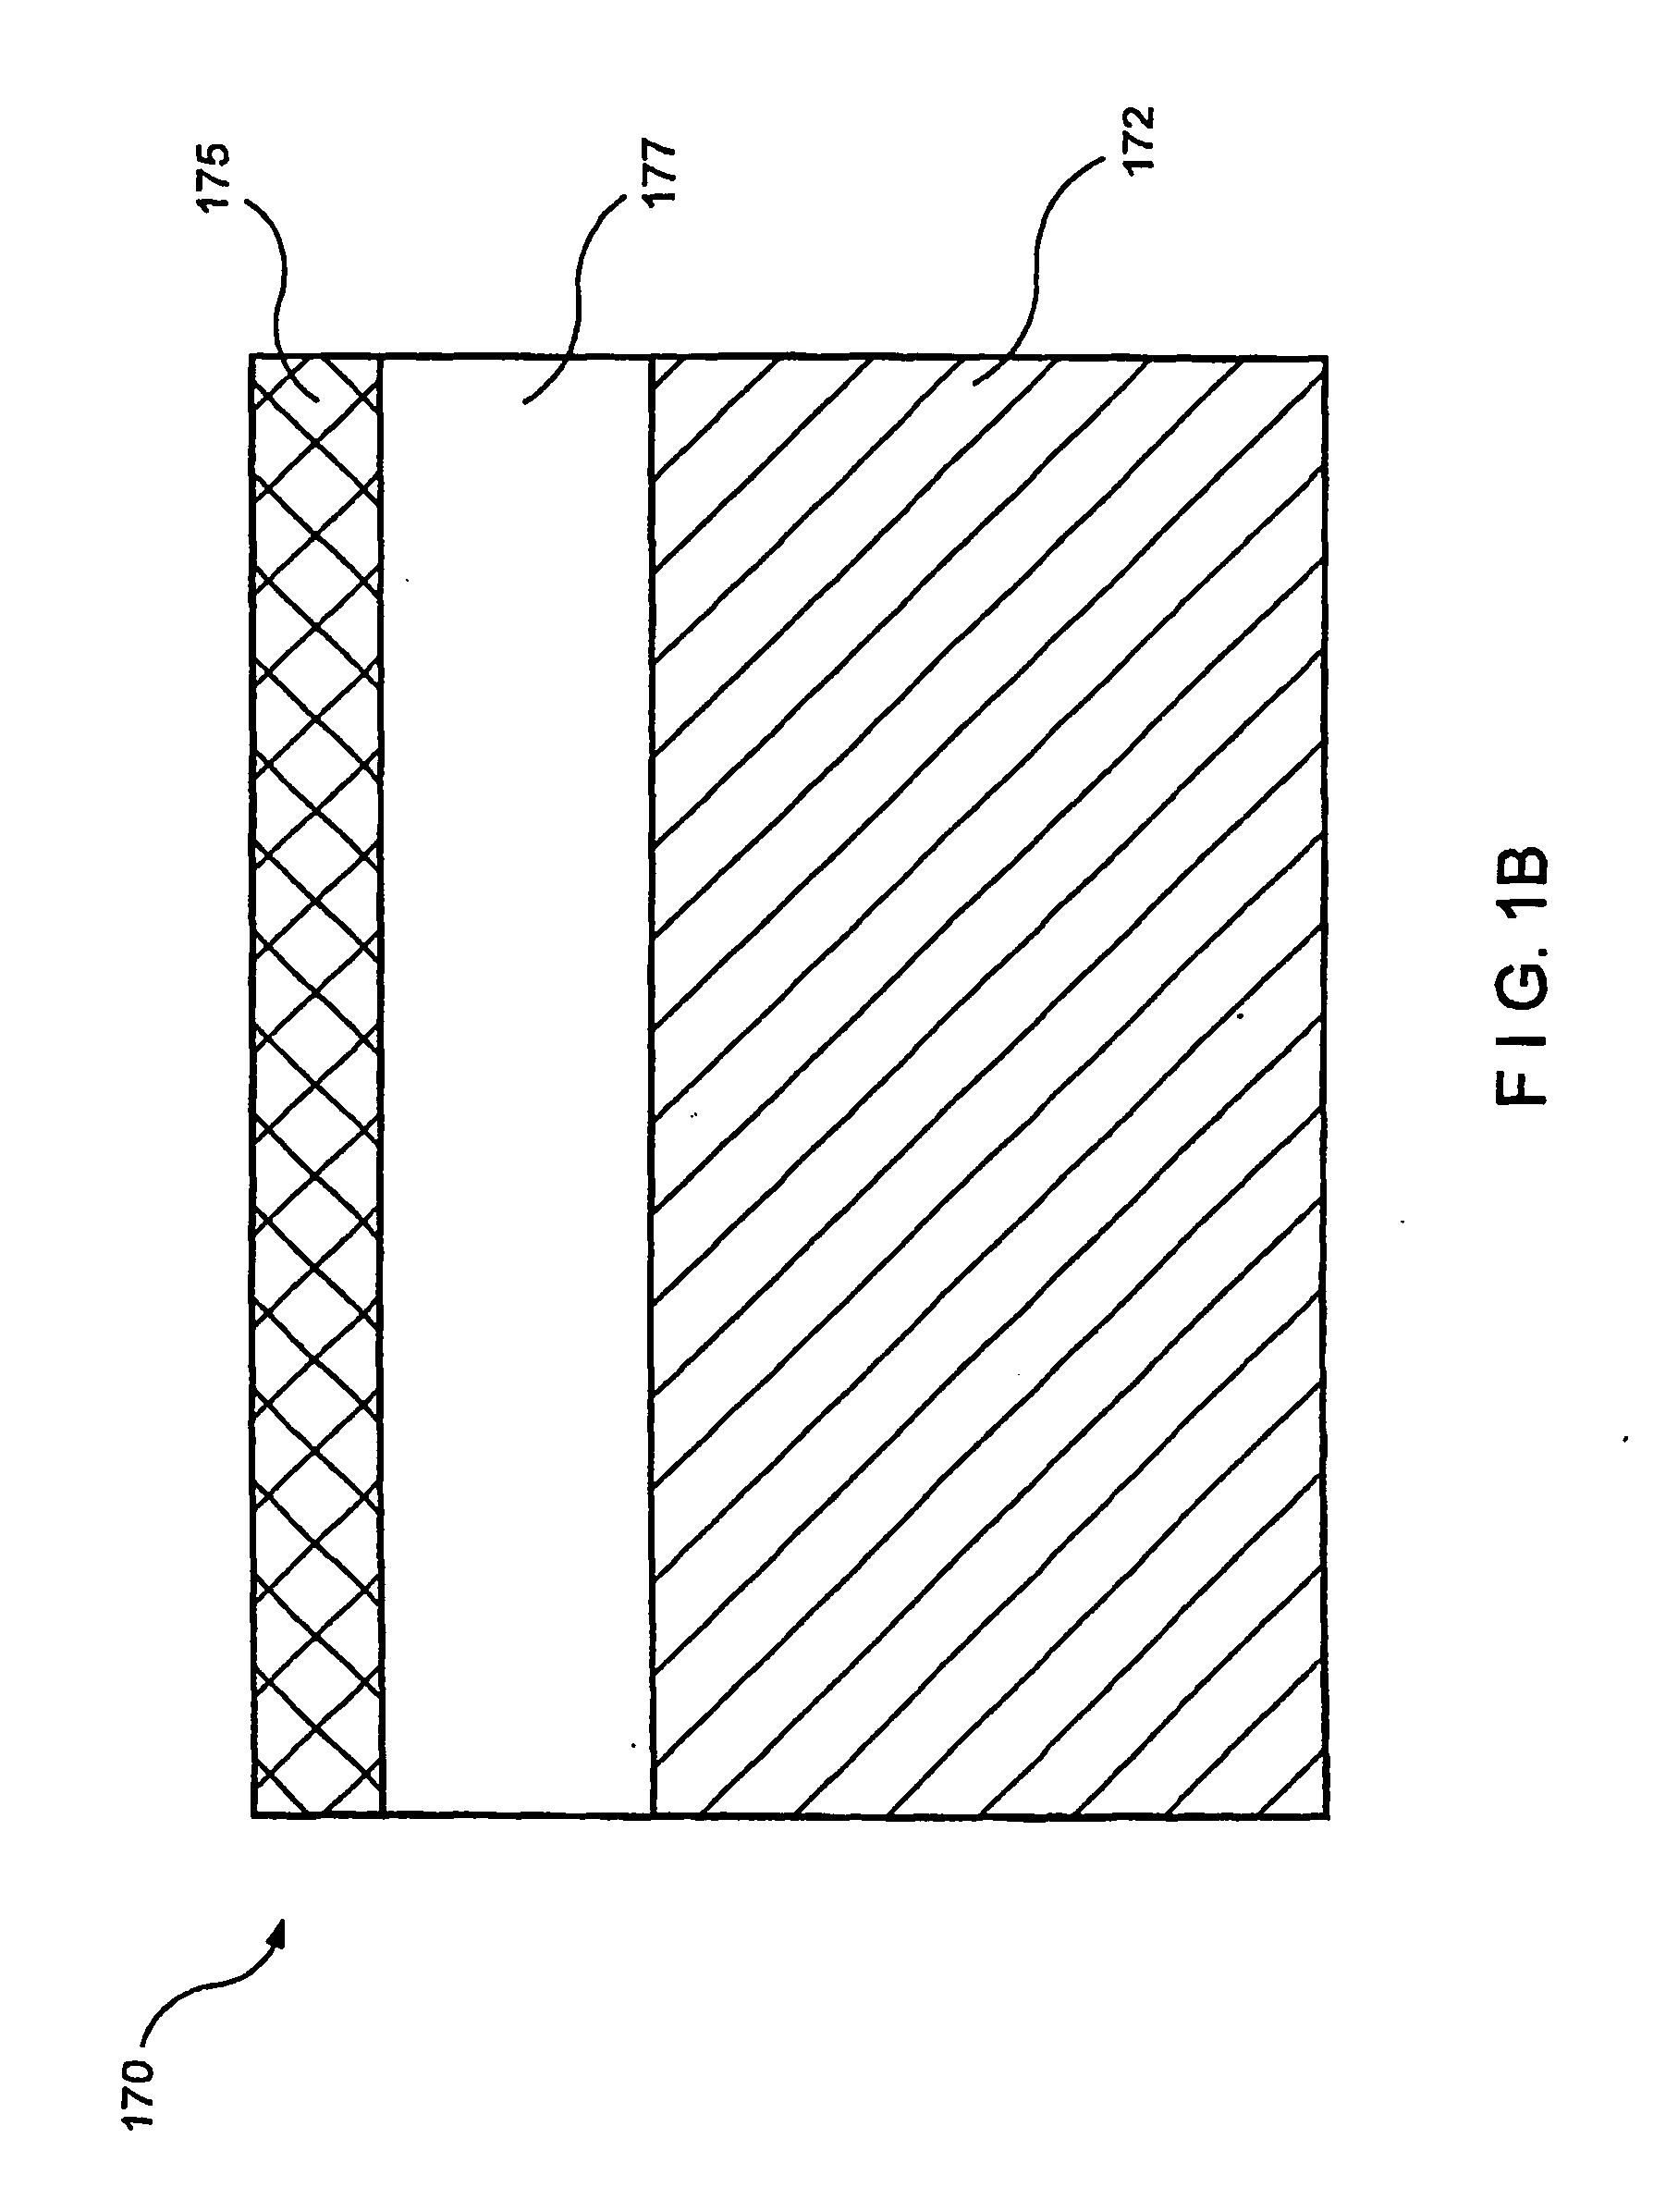 Process and system for laser crystallization processing of film regions on a substrate to provide substantial uniformity within arears in such regions and edge areas thereof, and a structure of film regions